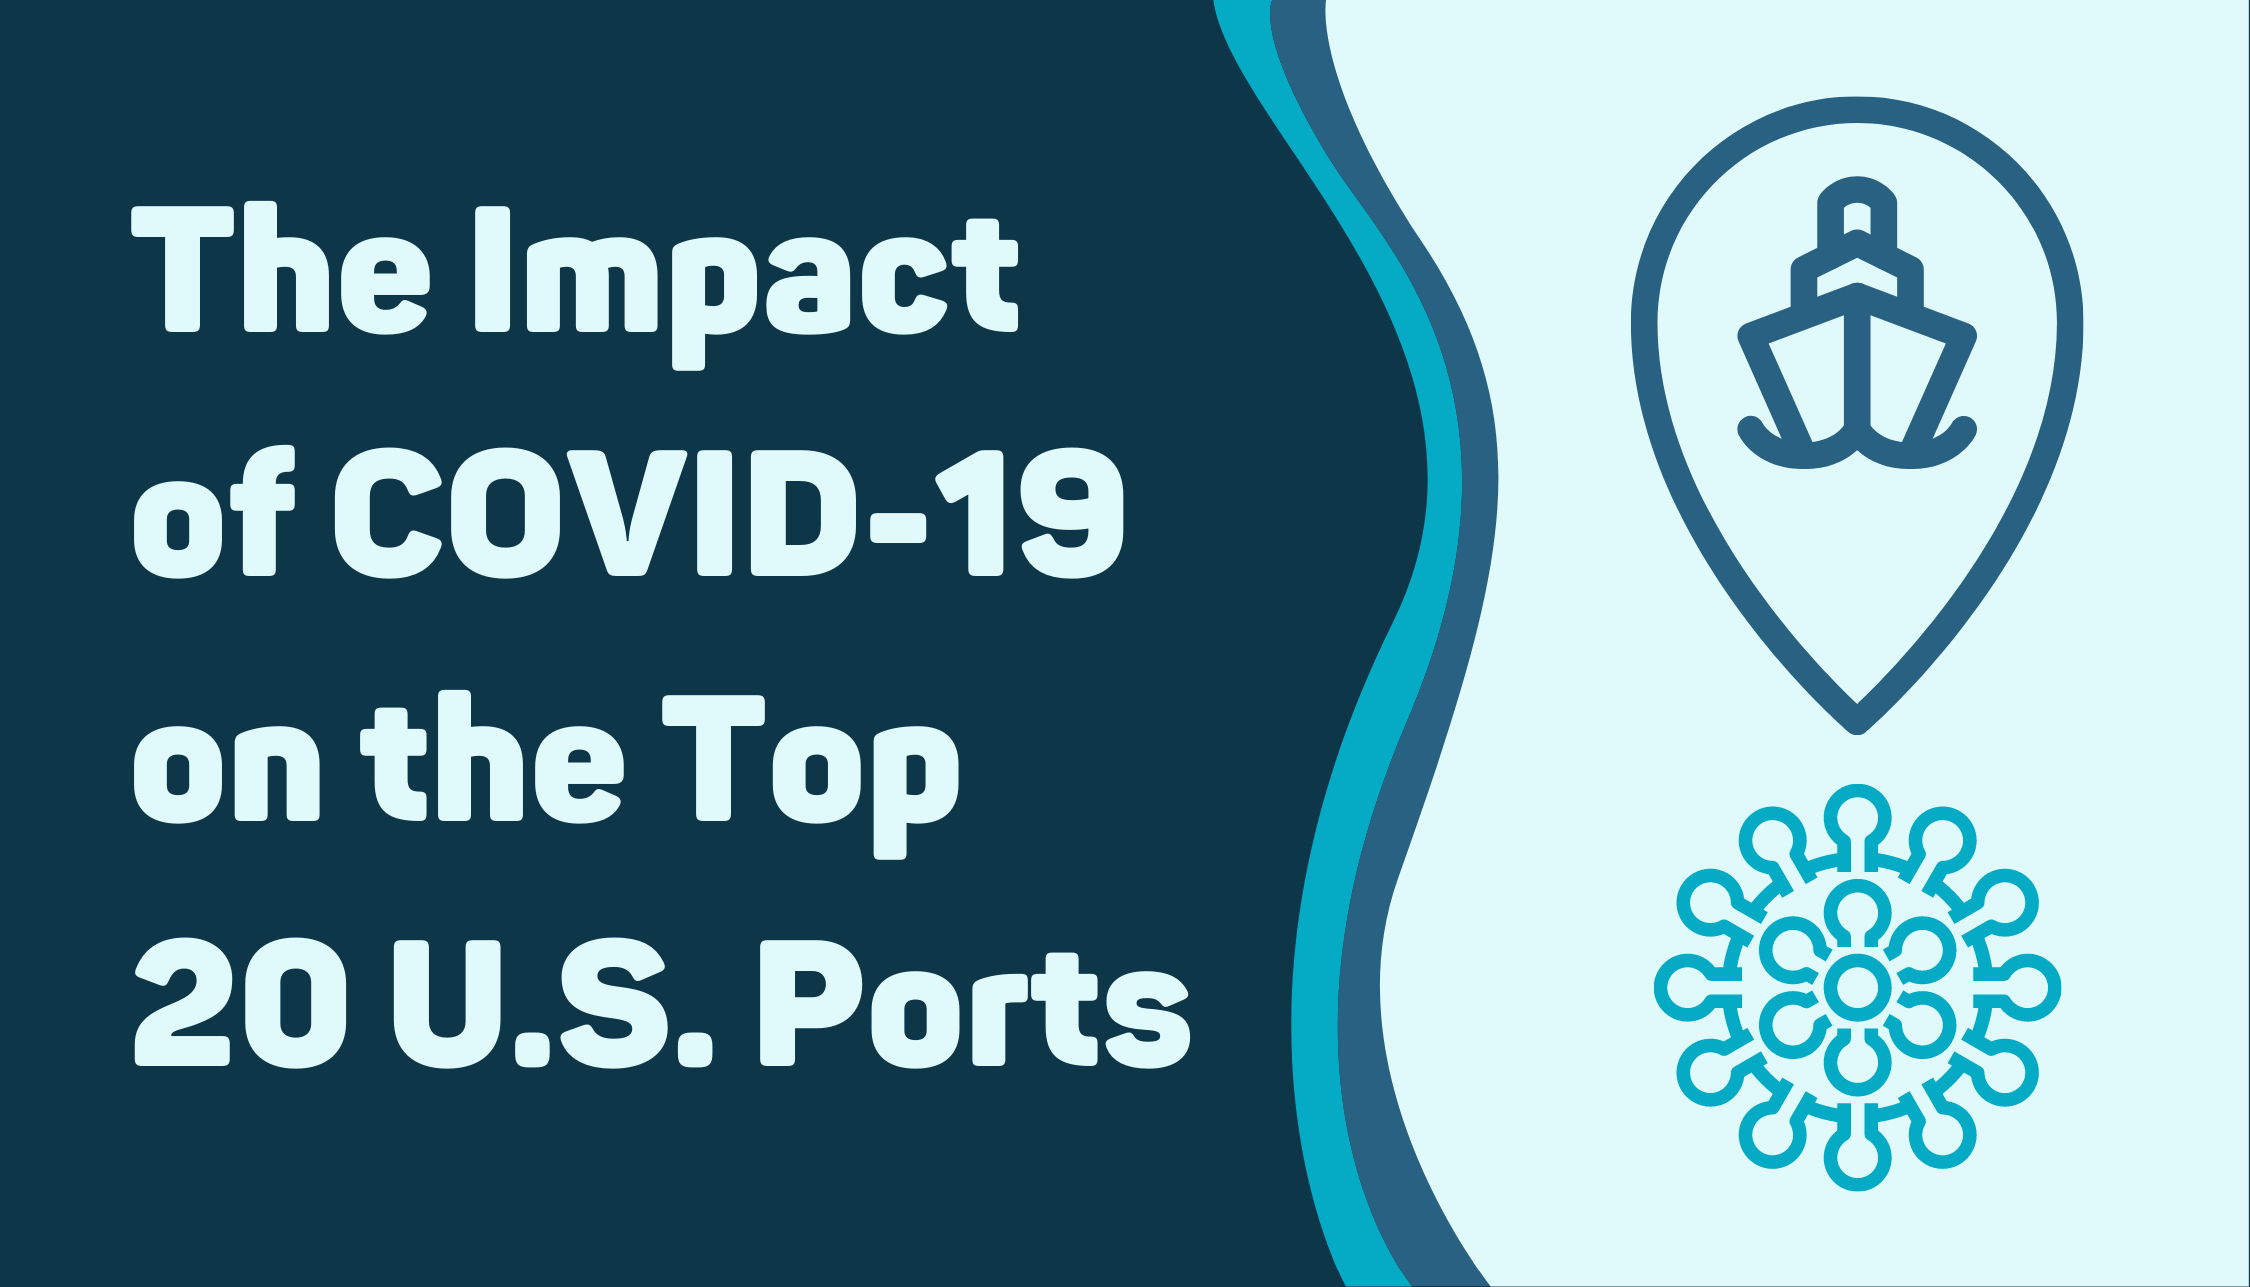 The Impact of COVID-19 on the Top 20 U.S. Ports